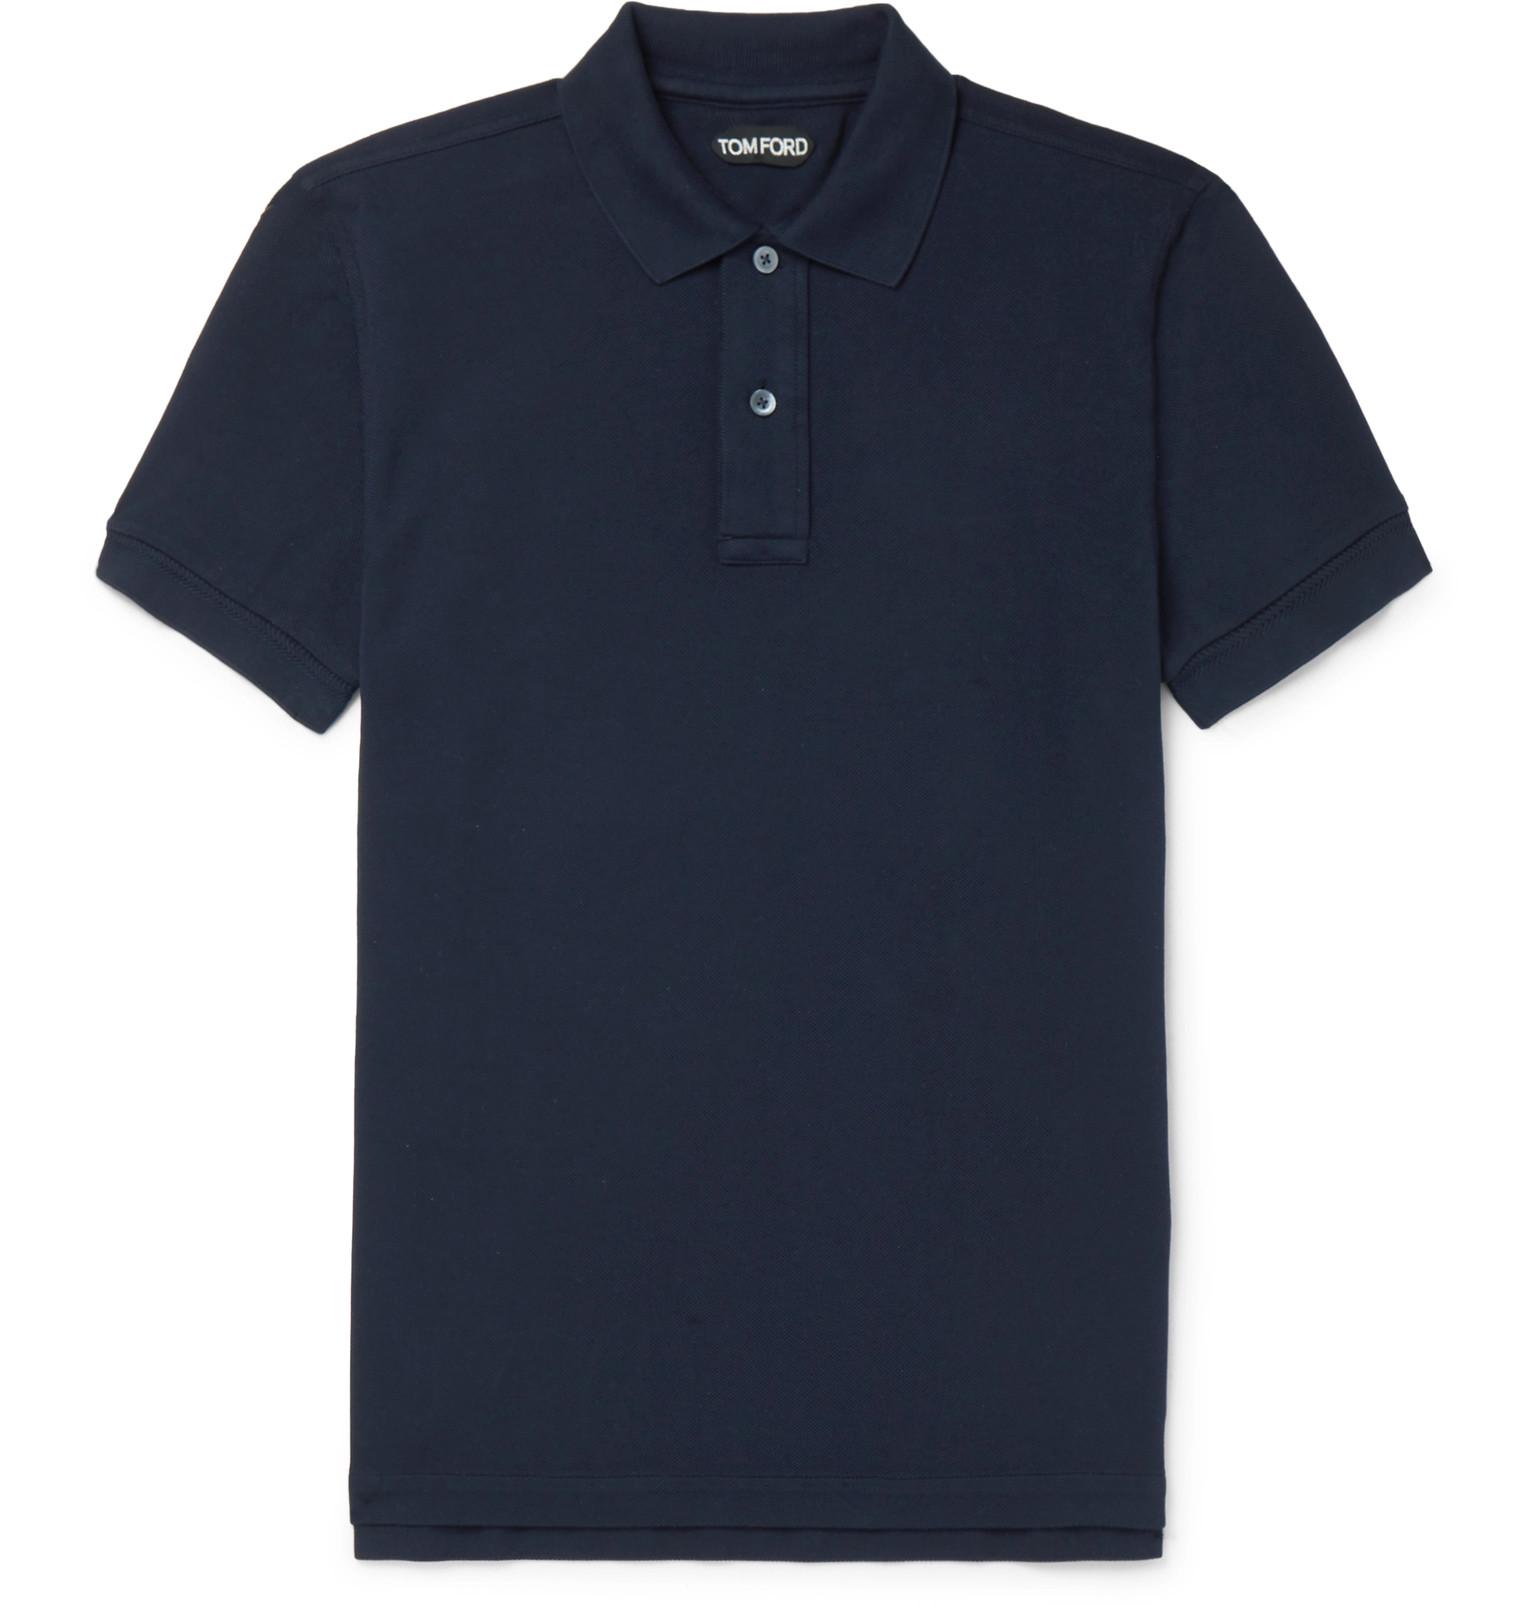 Tom Ford Slim-fit Garment-dyed Cotton-piqué Polo Shirt in Blue for Men ...